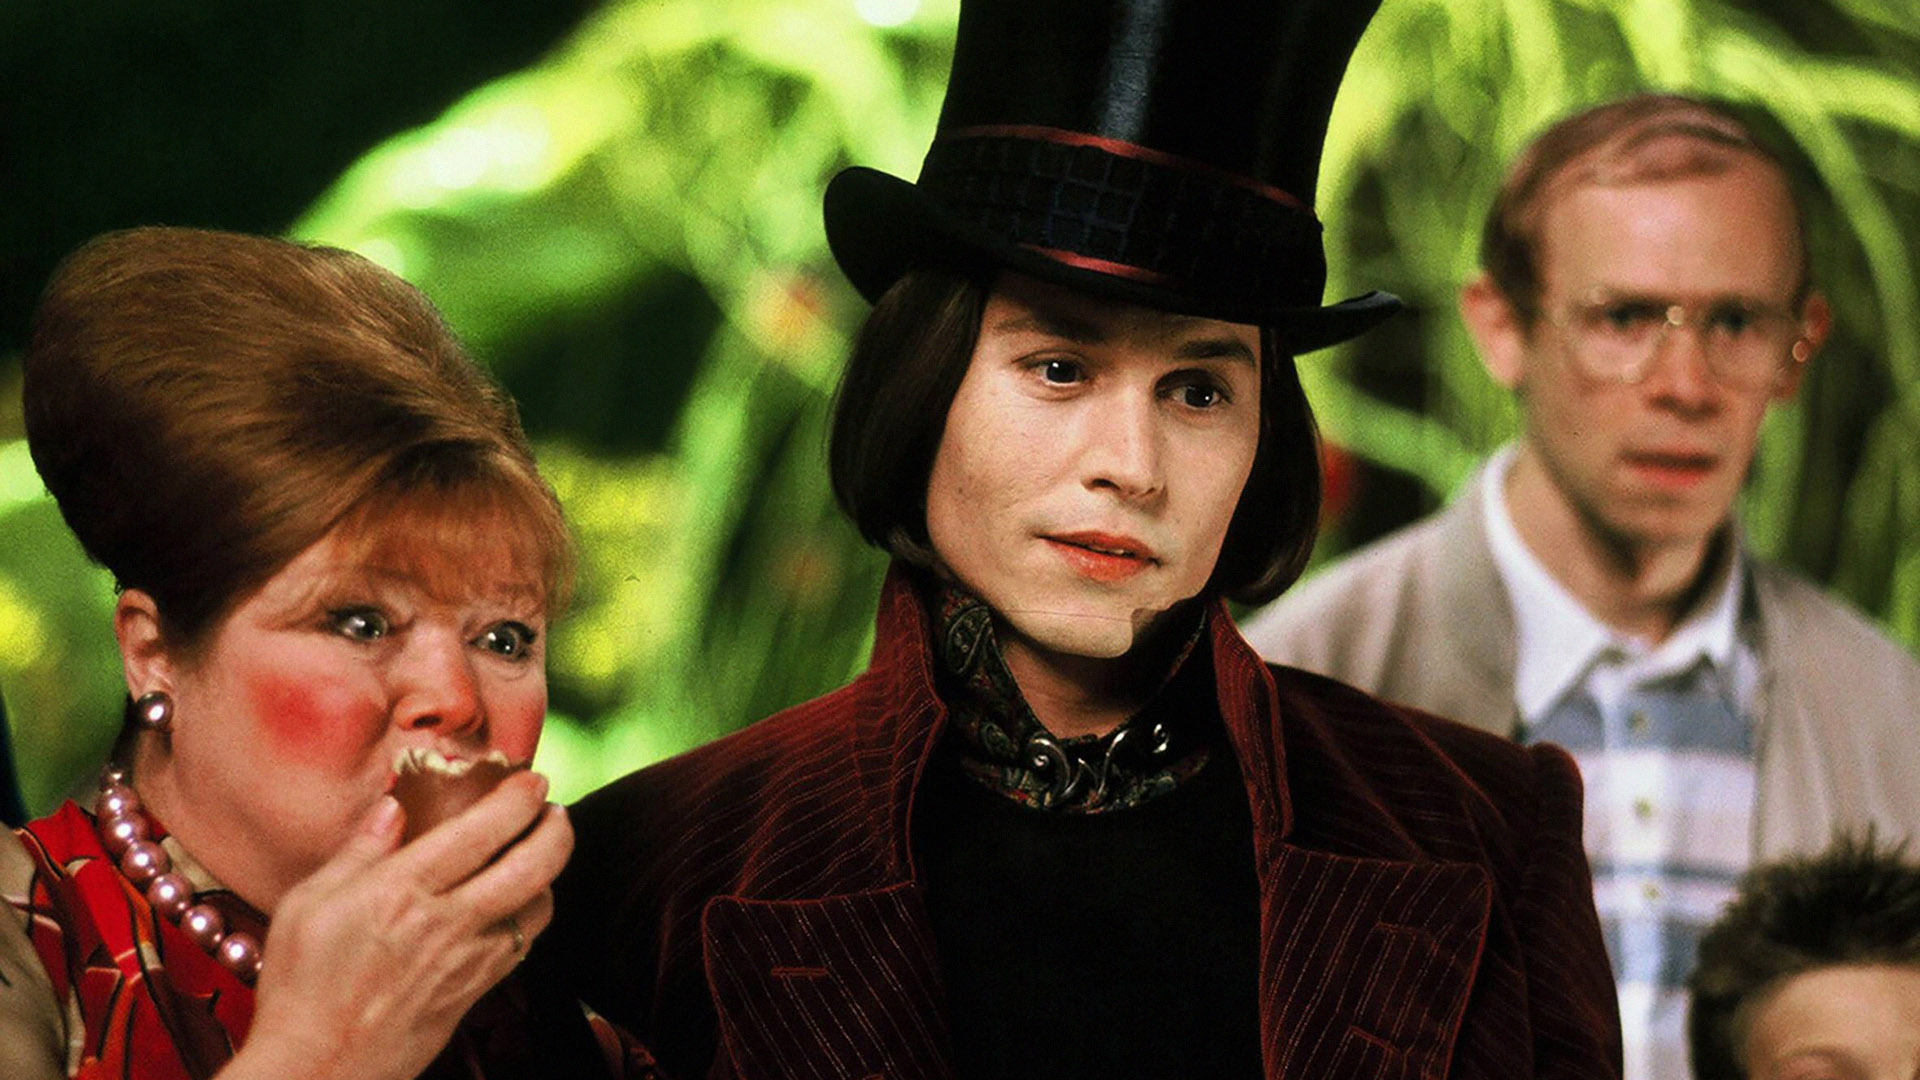 Then & Now: Whatever Happened to the Cast of Charlie and Chocolate Factory?